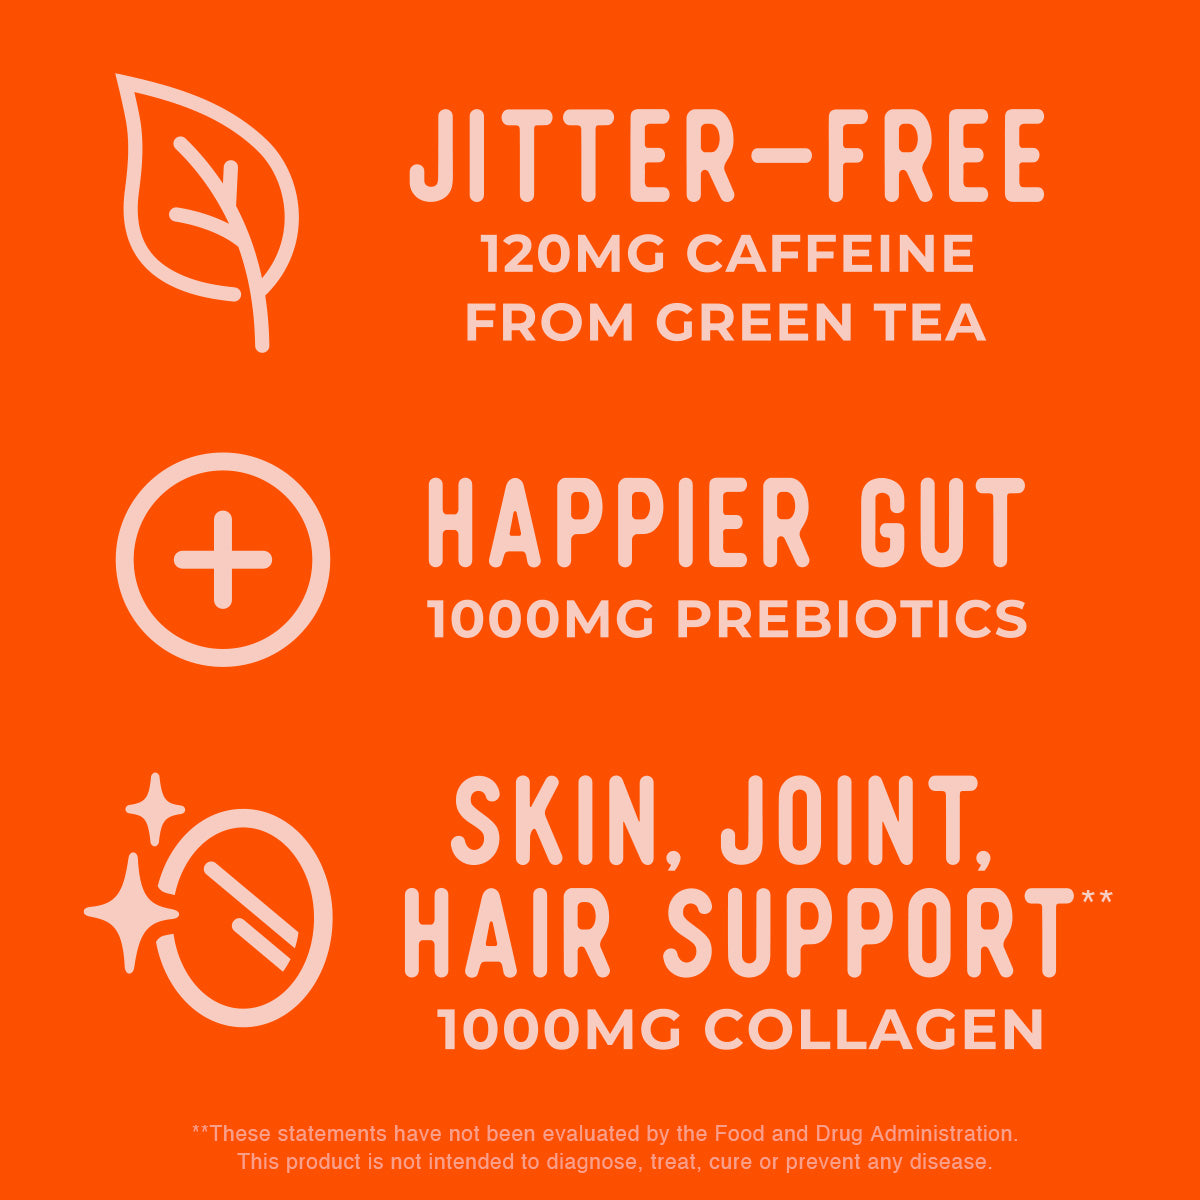 Jitter-Free 120MG Caffeine From Green Tea. Happier Gut 1000MG Prebiotics. Skin, joint, hair support** 1000MG Collagen. **These statements have not been evaluated by the FDA. This product is not intended to diagnose, treat, cure, or prevent any disease.